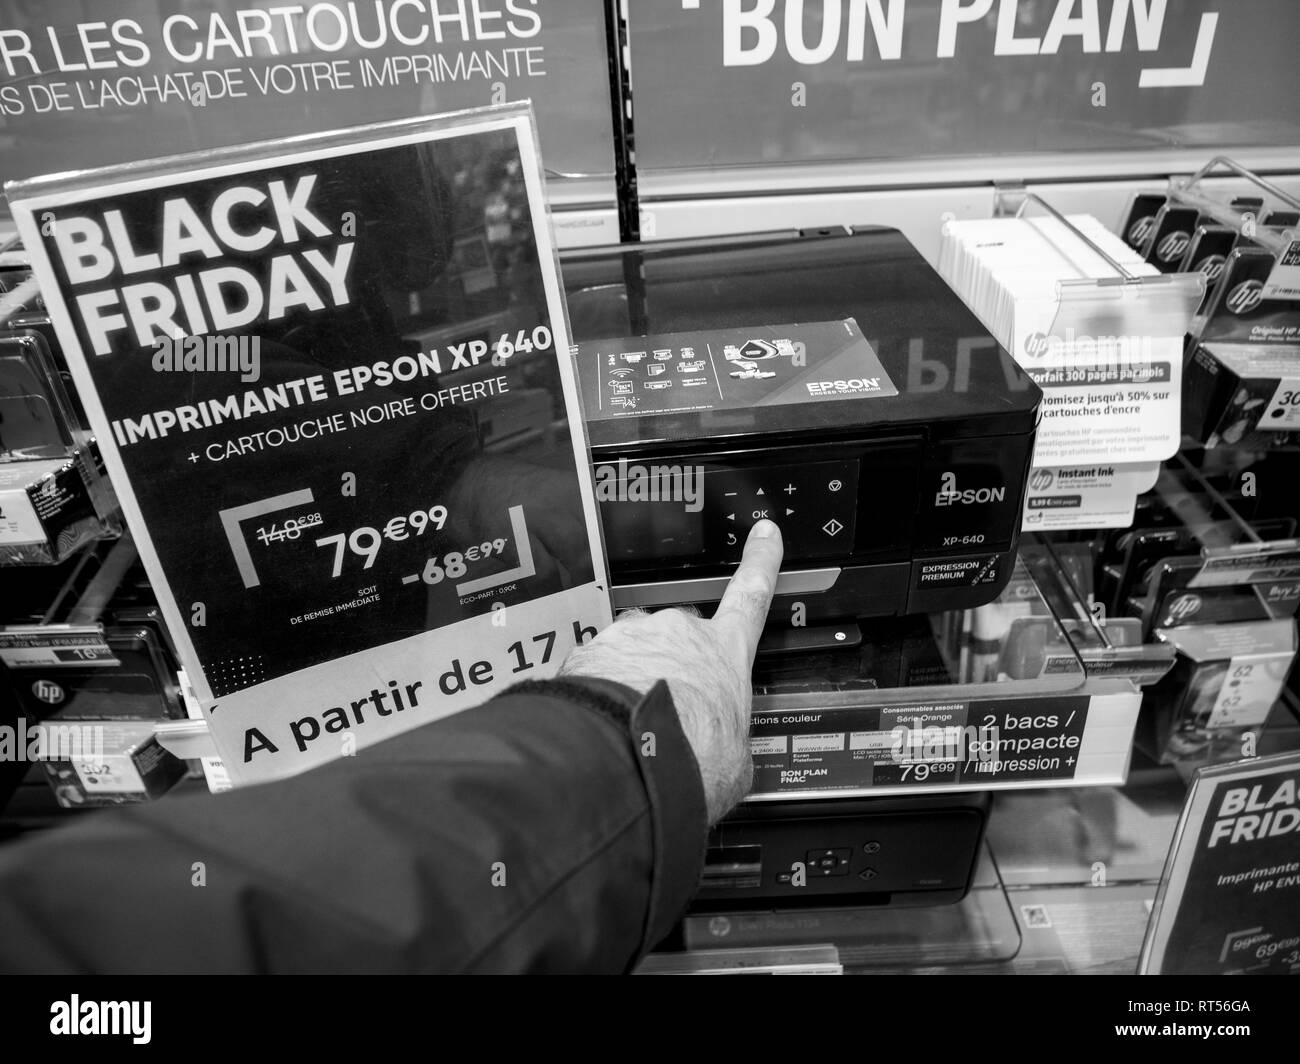 PARIS, FRANCE - NOV 23, 2017: Black Friday store shopping day in France, Paris with customers people buying electronics gadget in Fnac retail chain - man pointing to Epson printer Stock Photo